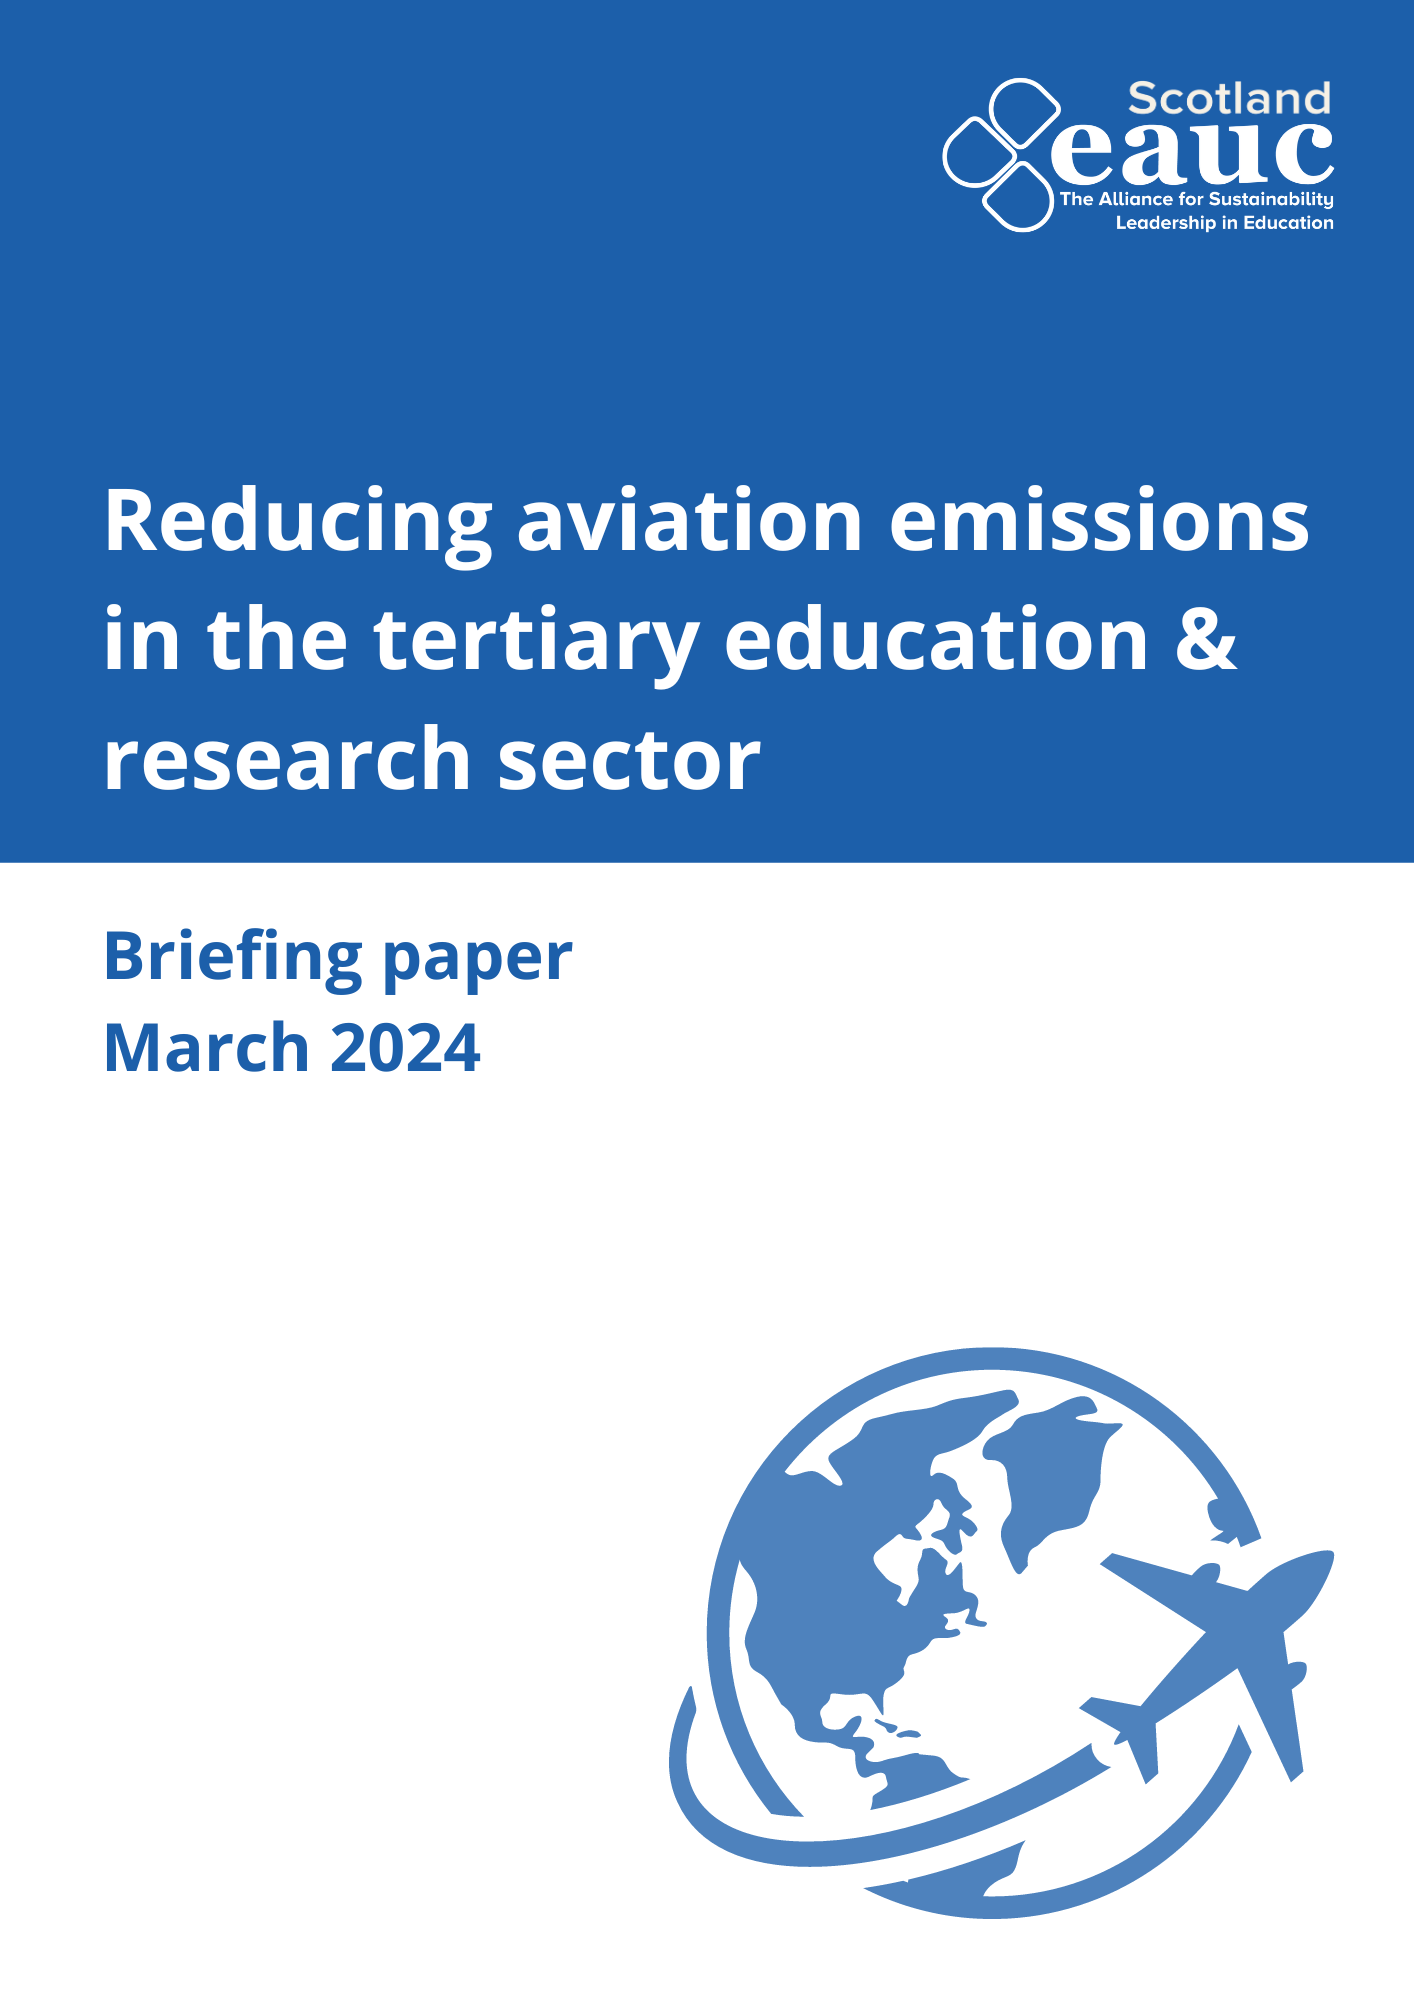 Reducing aviation emissions in the tertiary education and research sector briefing paper cover page.